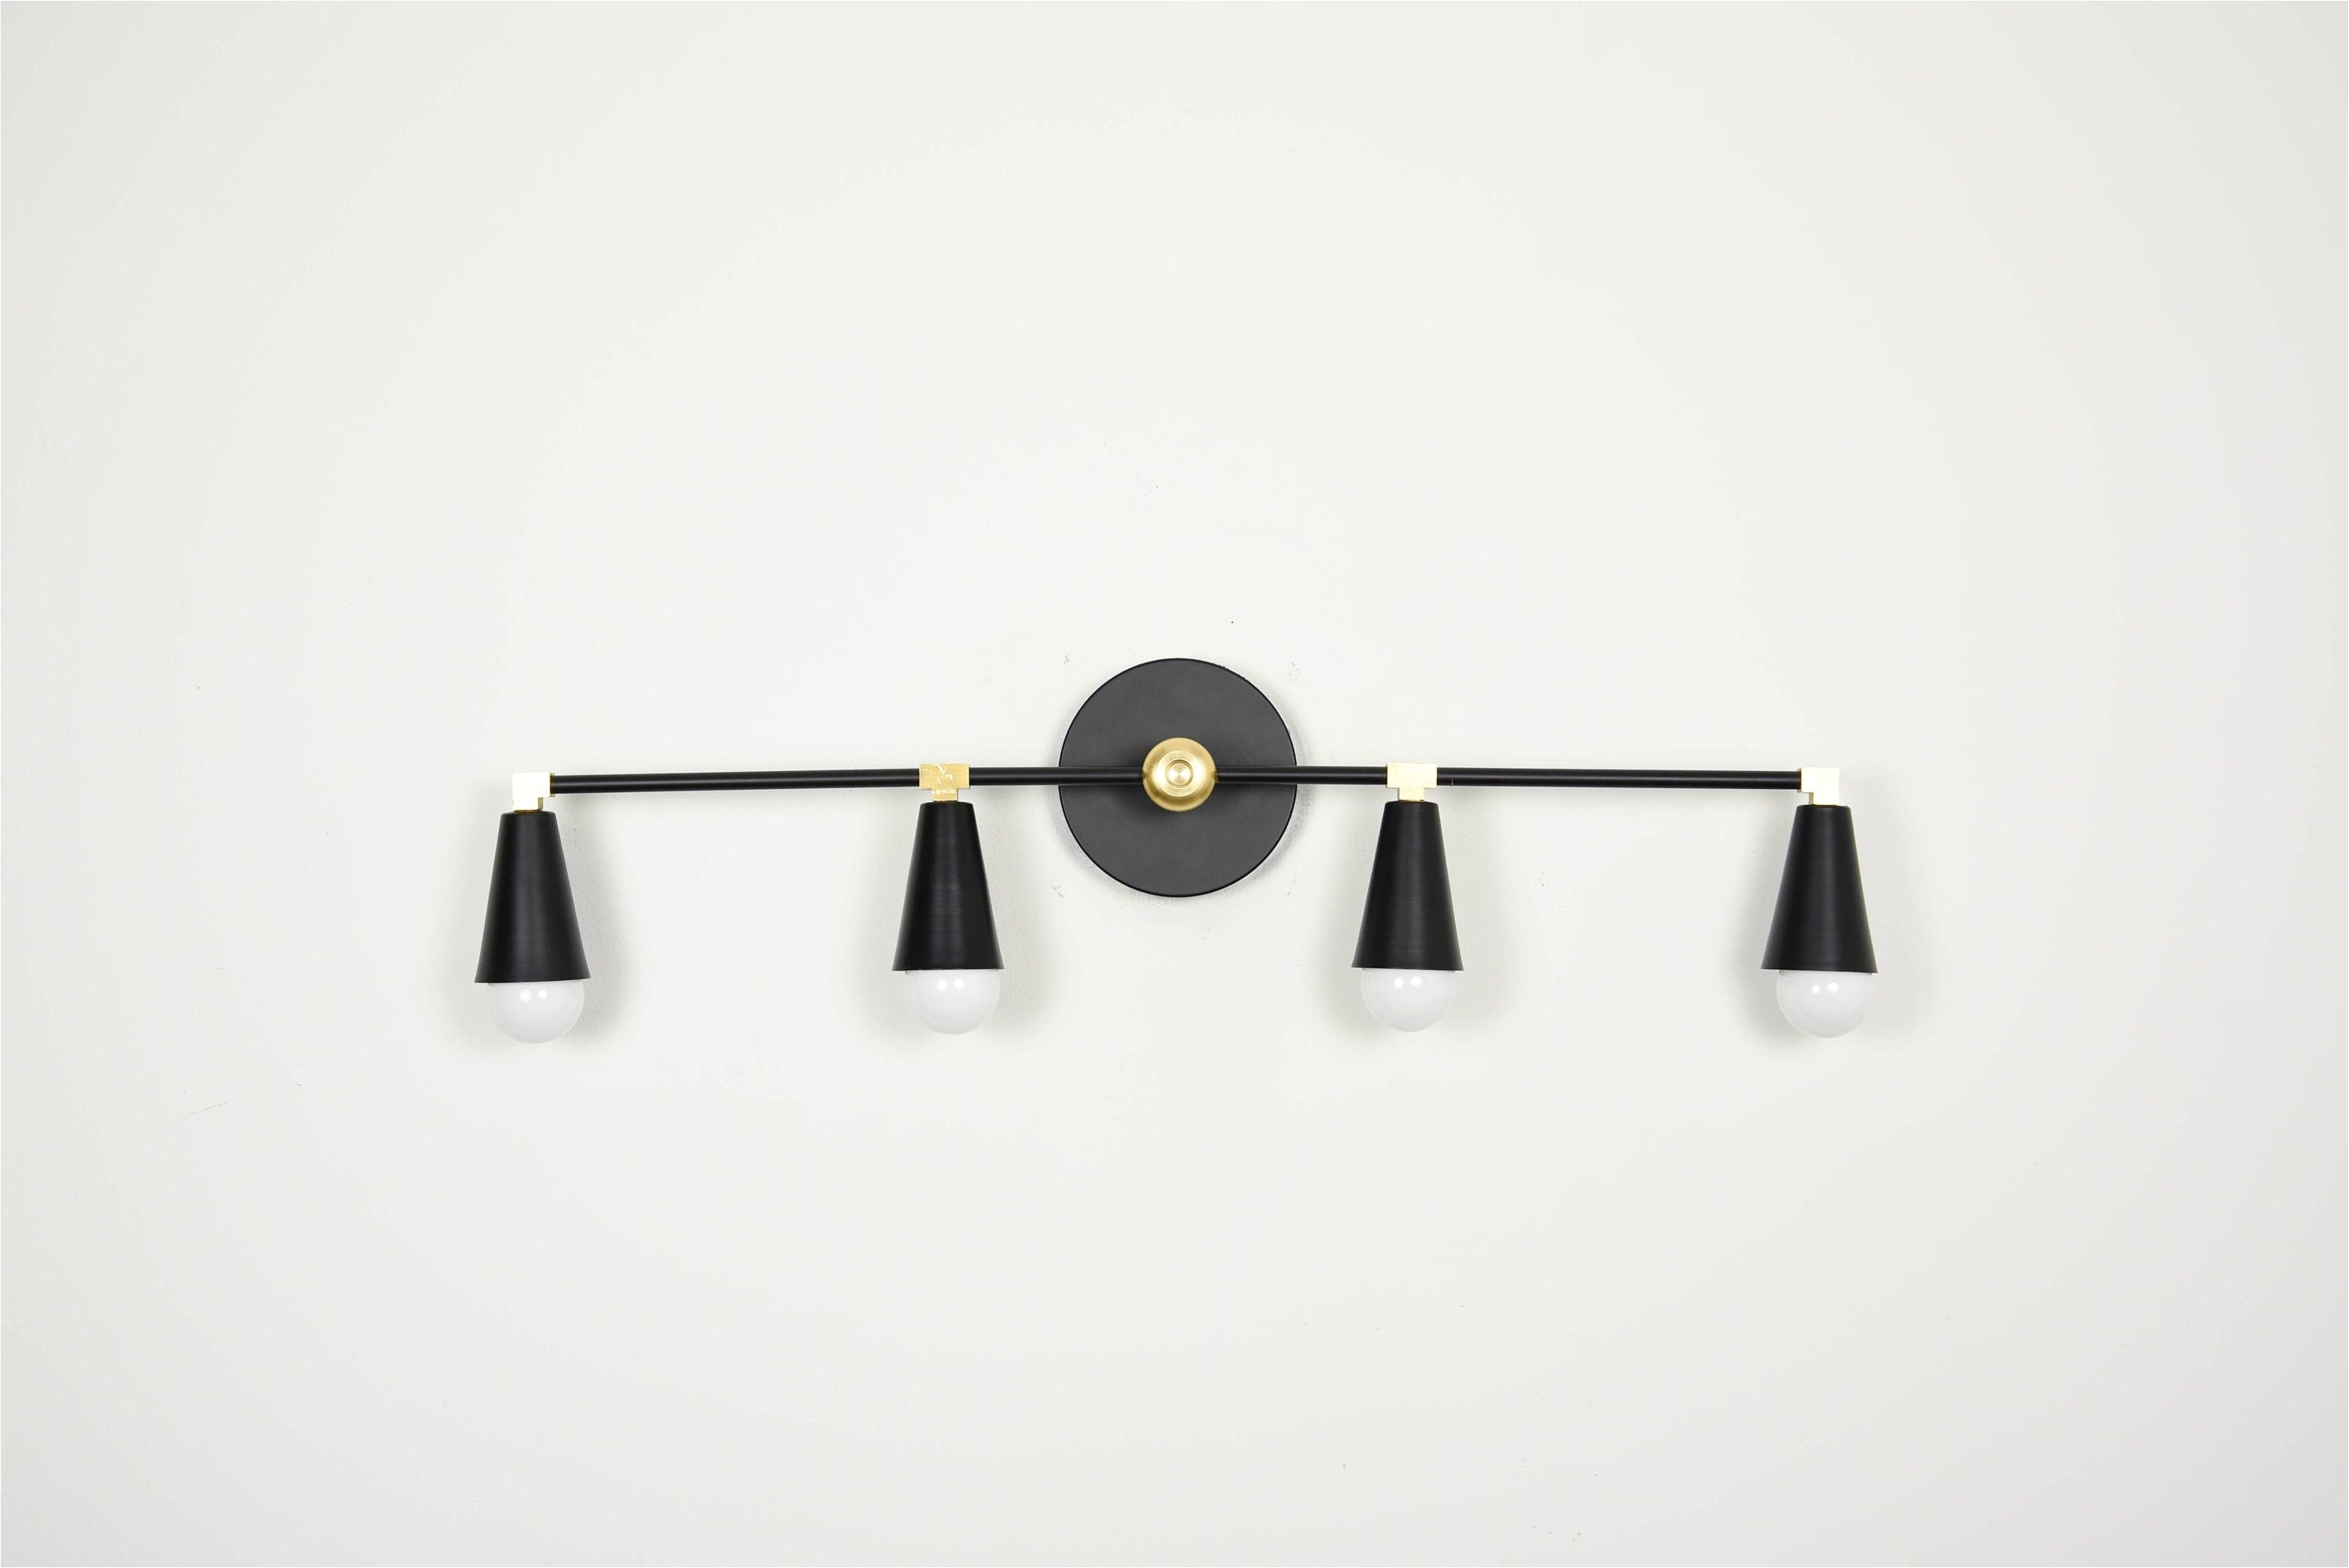 wall sconce vanity 4 light wall sconce black and brass gold 4 bulb cone cover modern mid century industrial light bathroom vanity ul listed